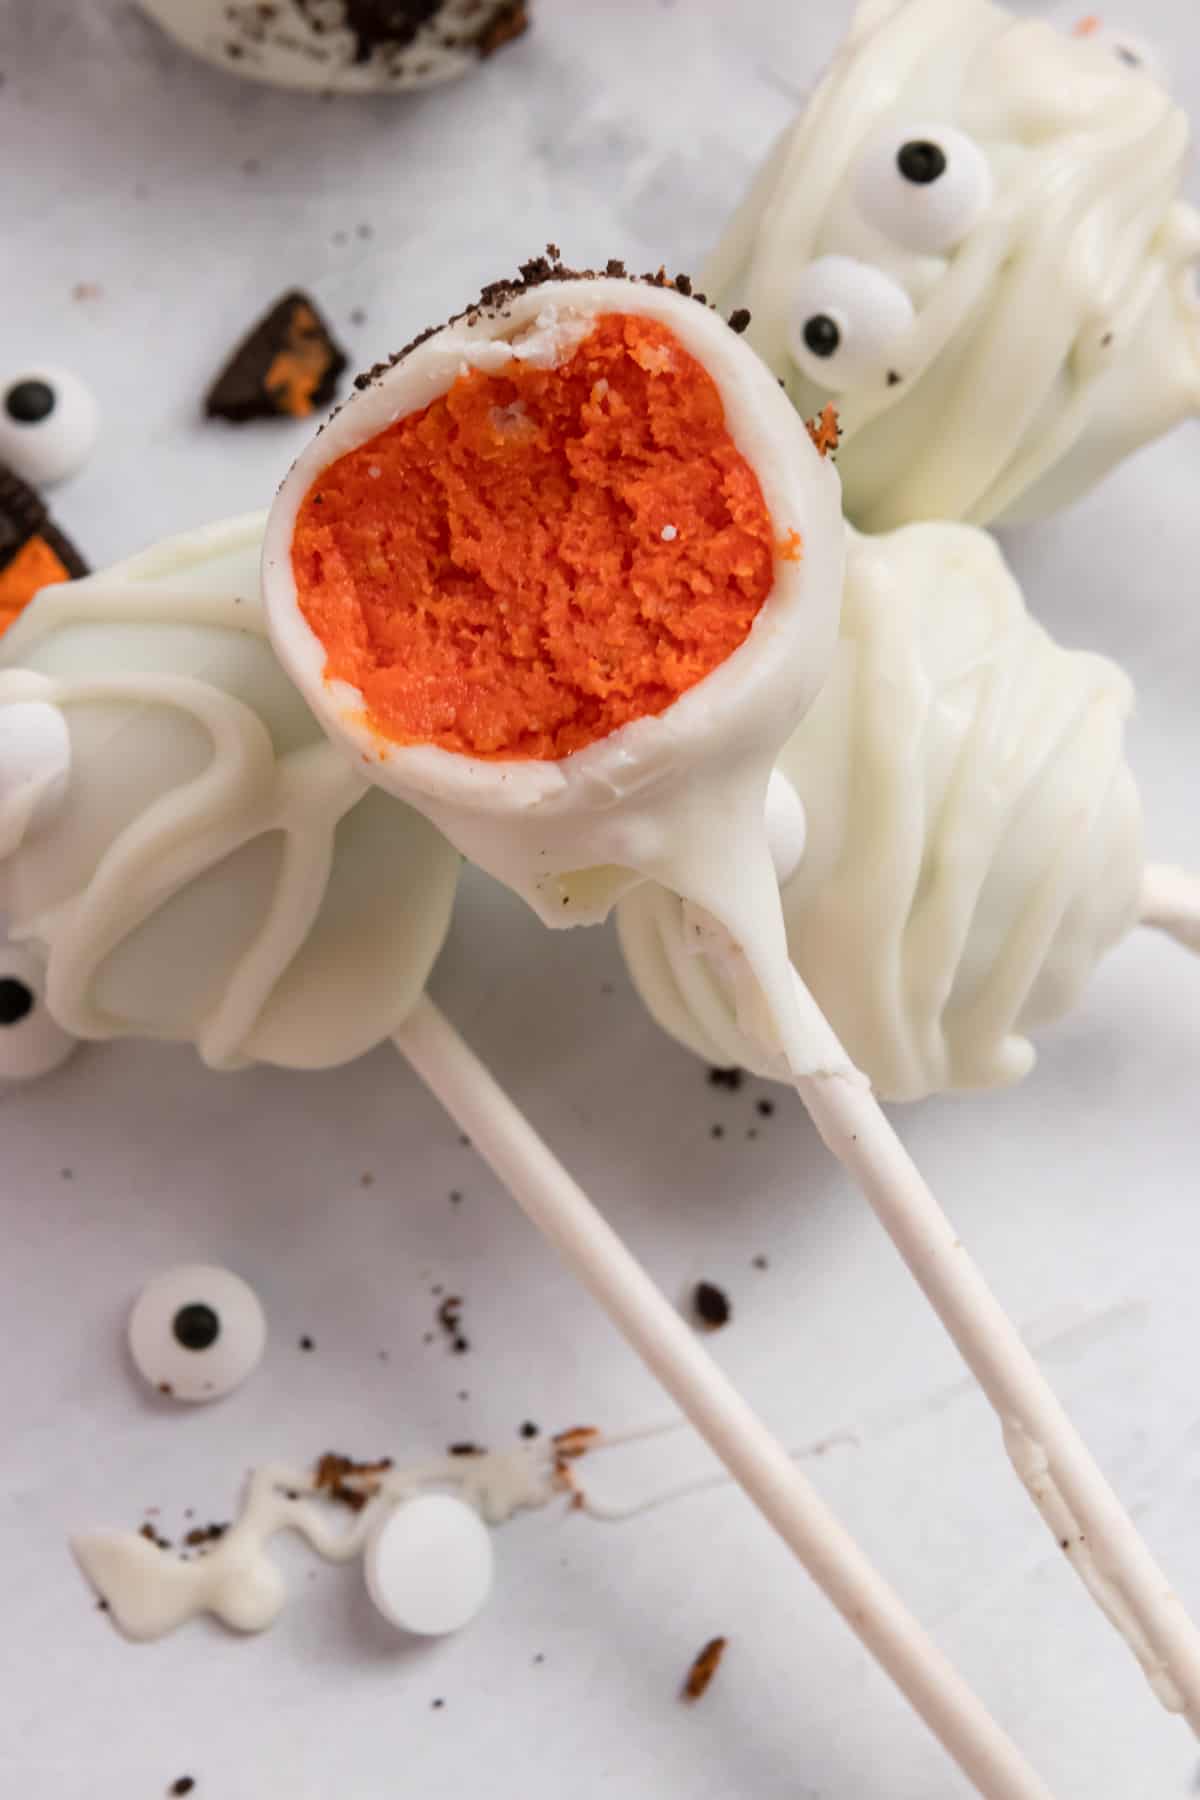 Cake pop with bite taken out to show orange inside.